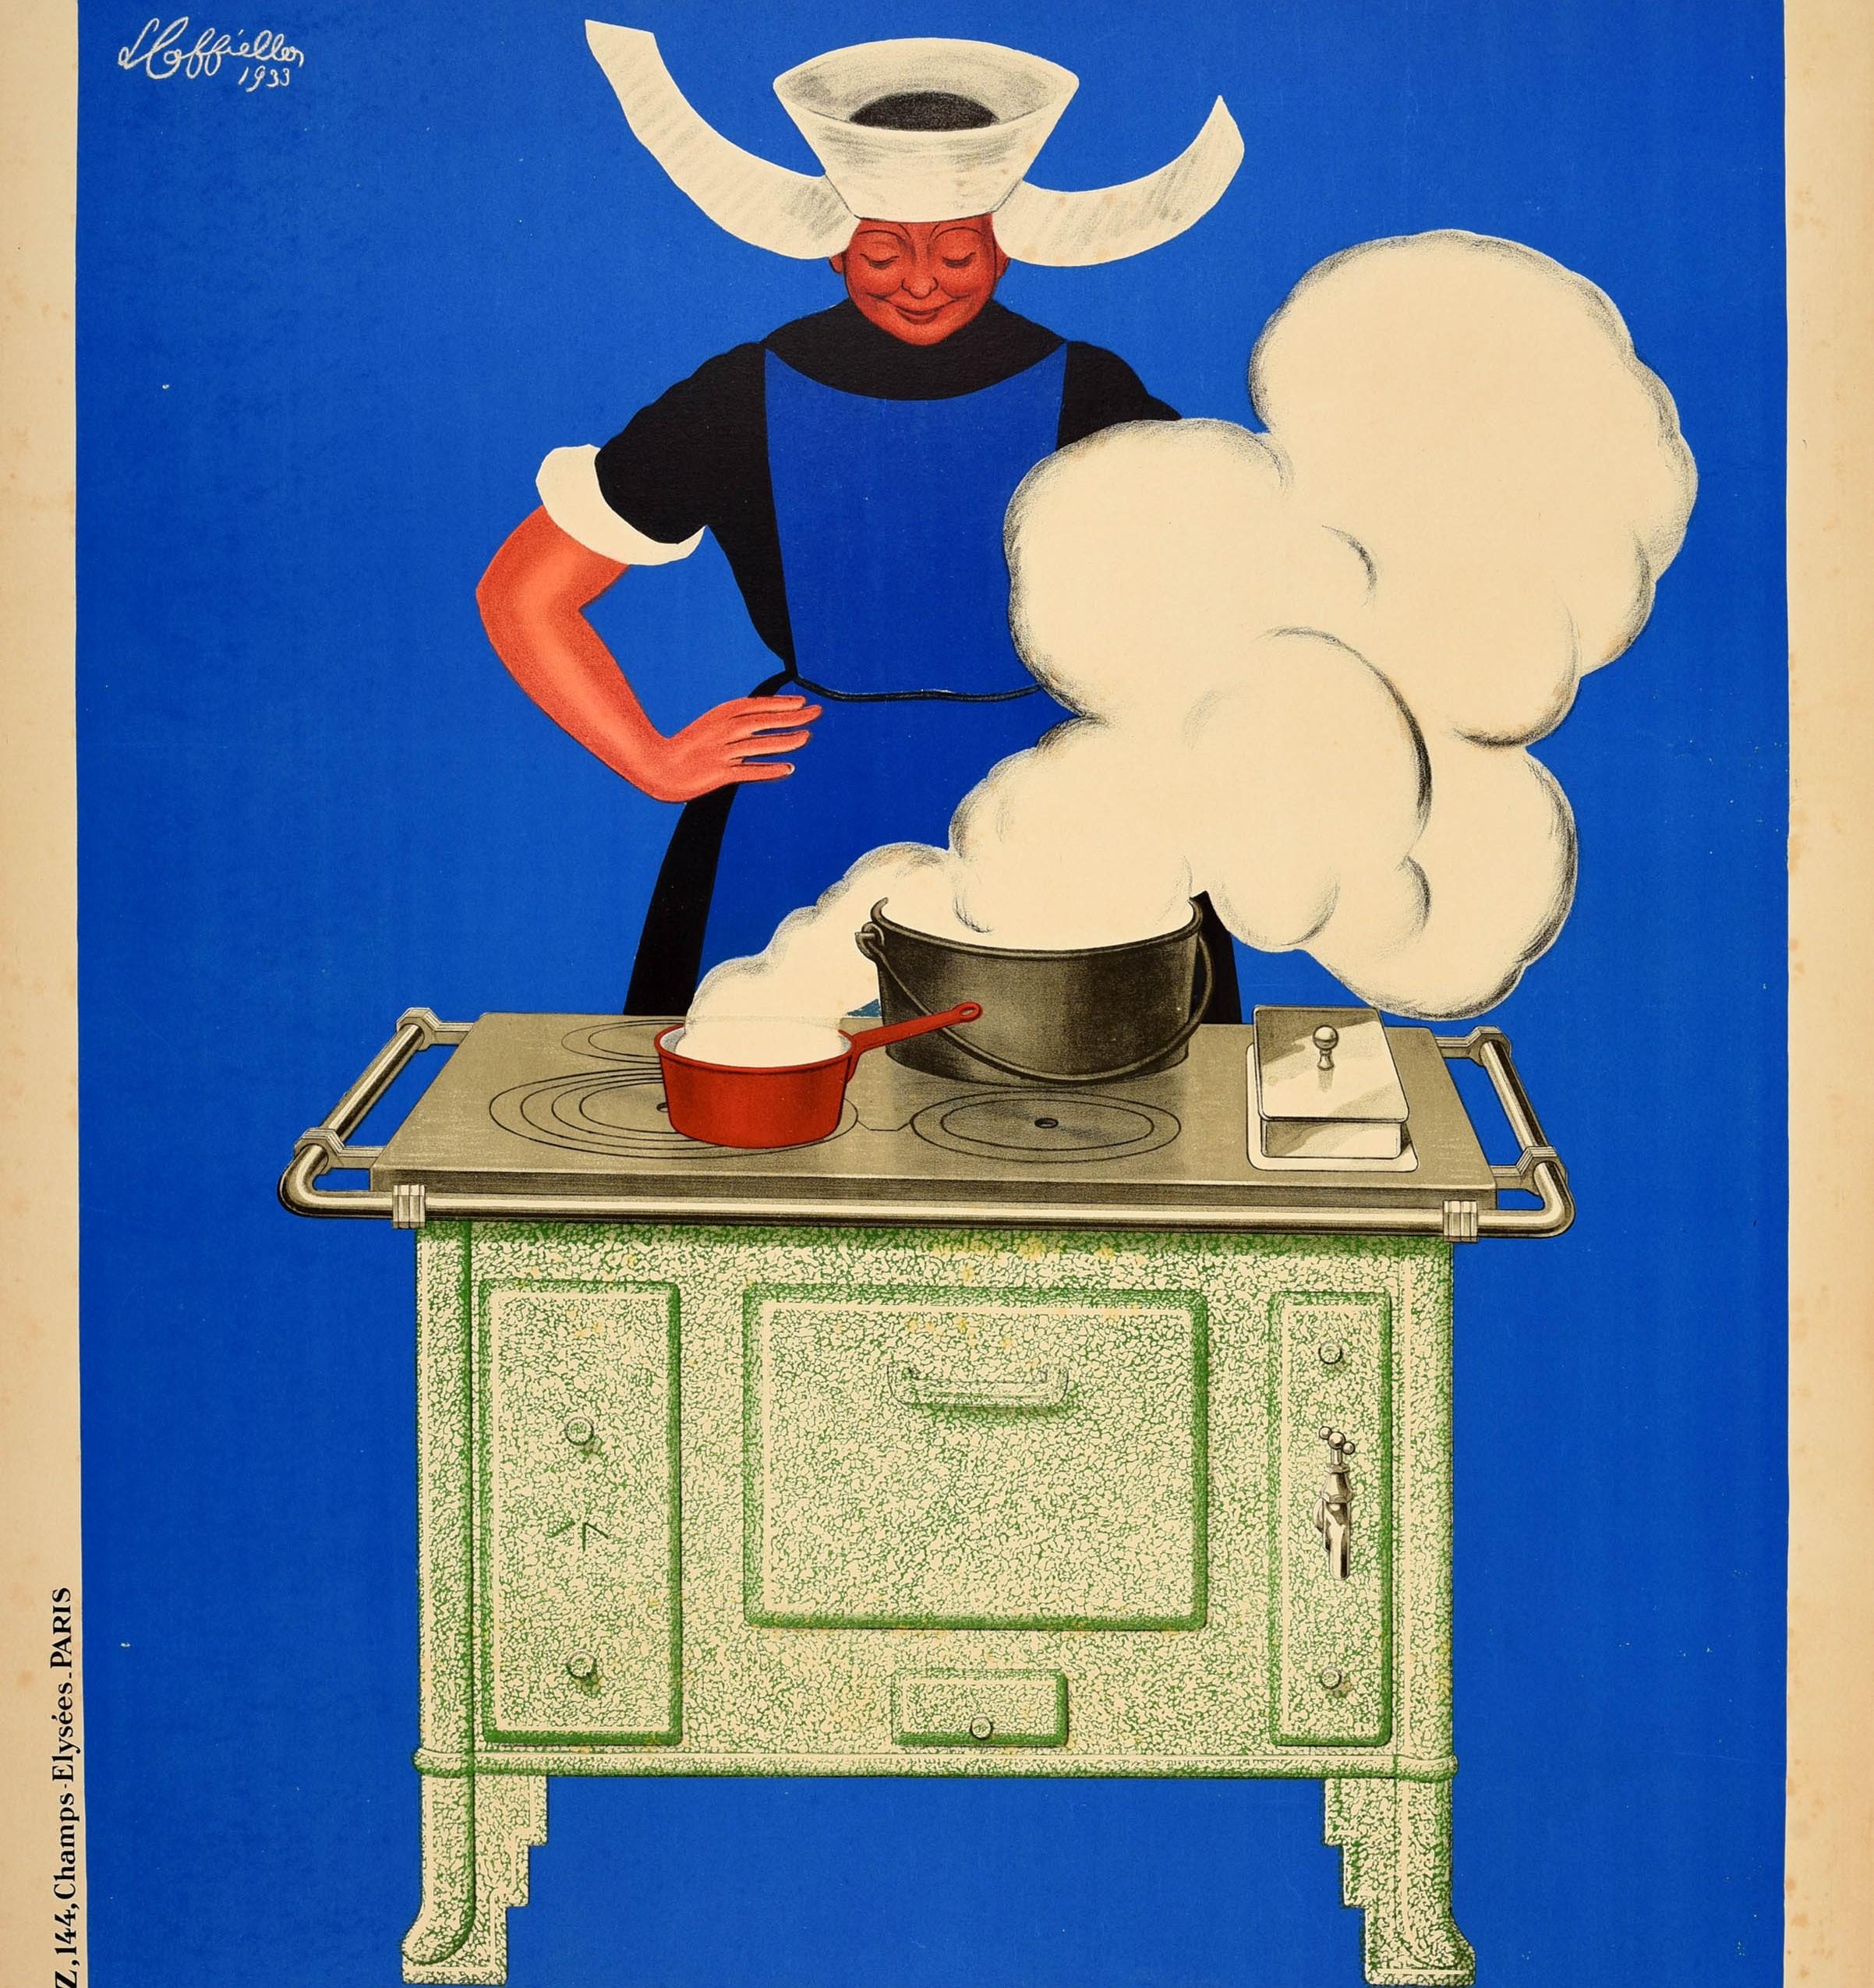 Original Vintage Advertising Poster Baudin Cuisiniere Cooking Leonetto Cappiello In Good Condition For Sale In London, GB